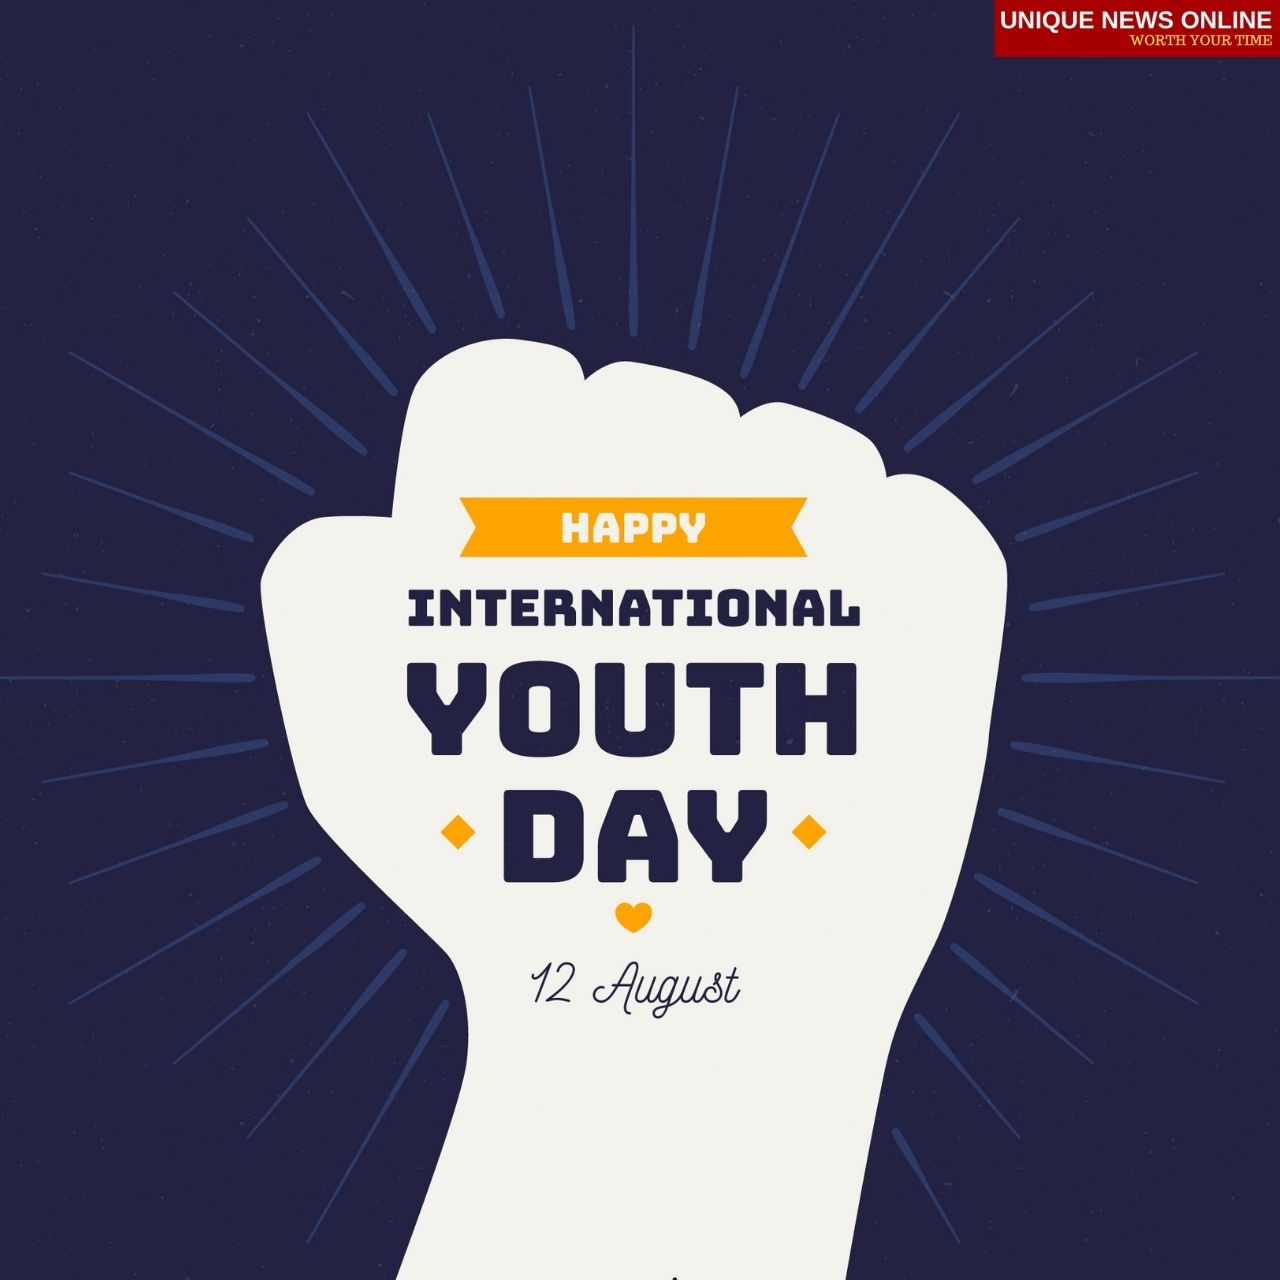 International Youth Day 2021 Theme, Wishes, Quotes, Slogan, Poster, Messages, Greetings, Status and HD Images to Share